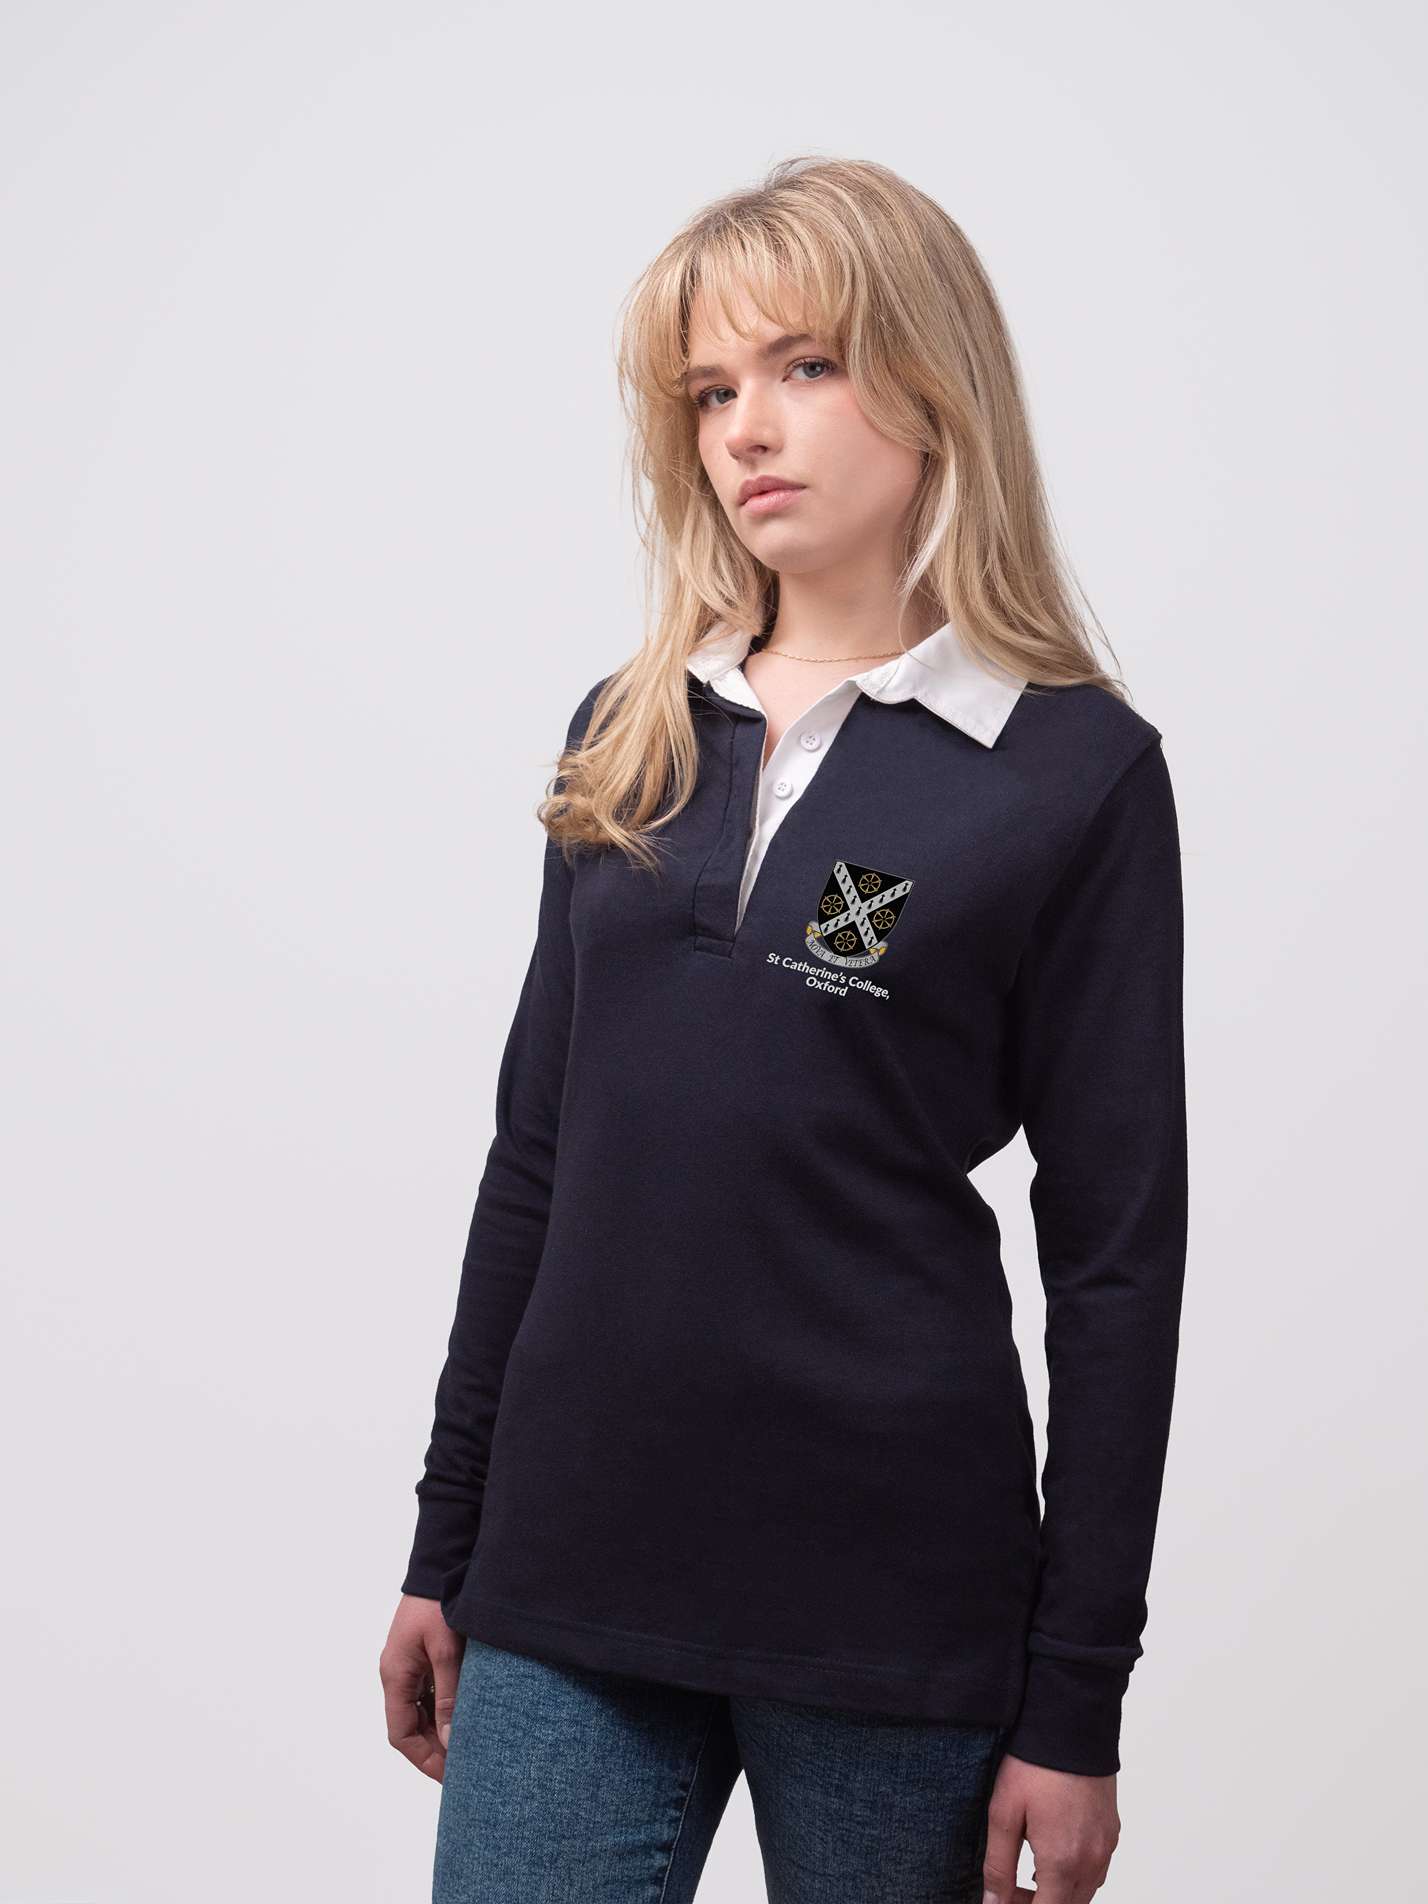 Student wearing a navy St Catherine's College rugby shirt with embroidered crest